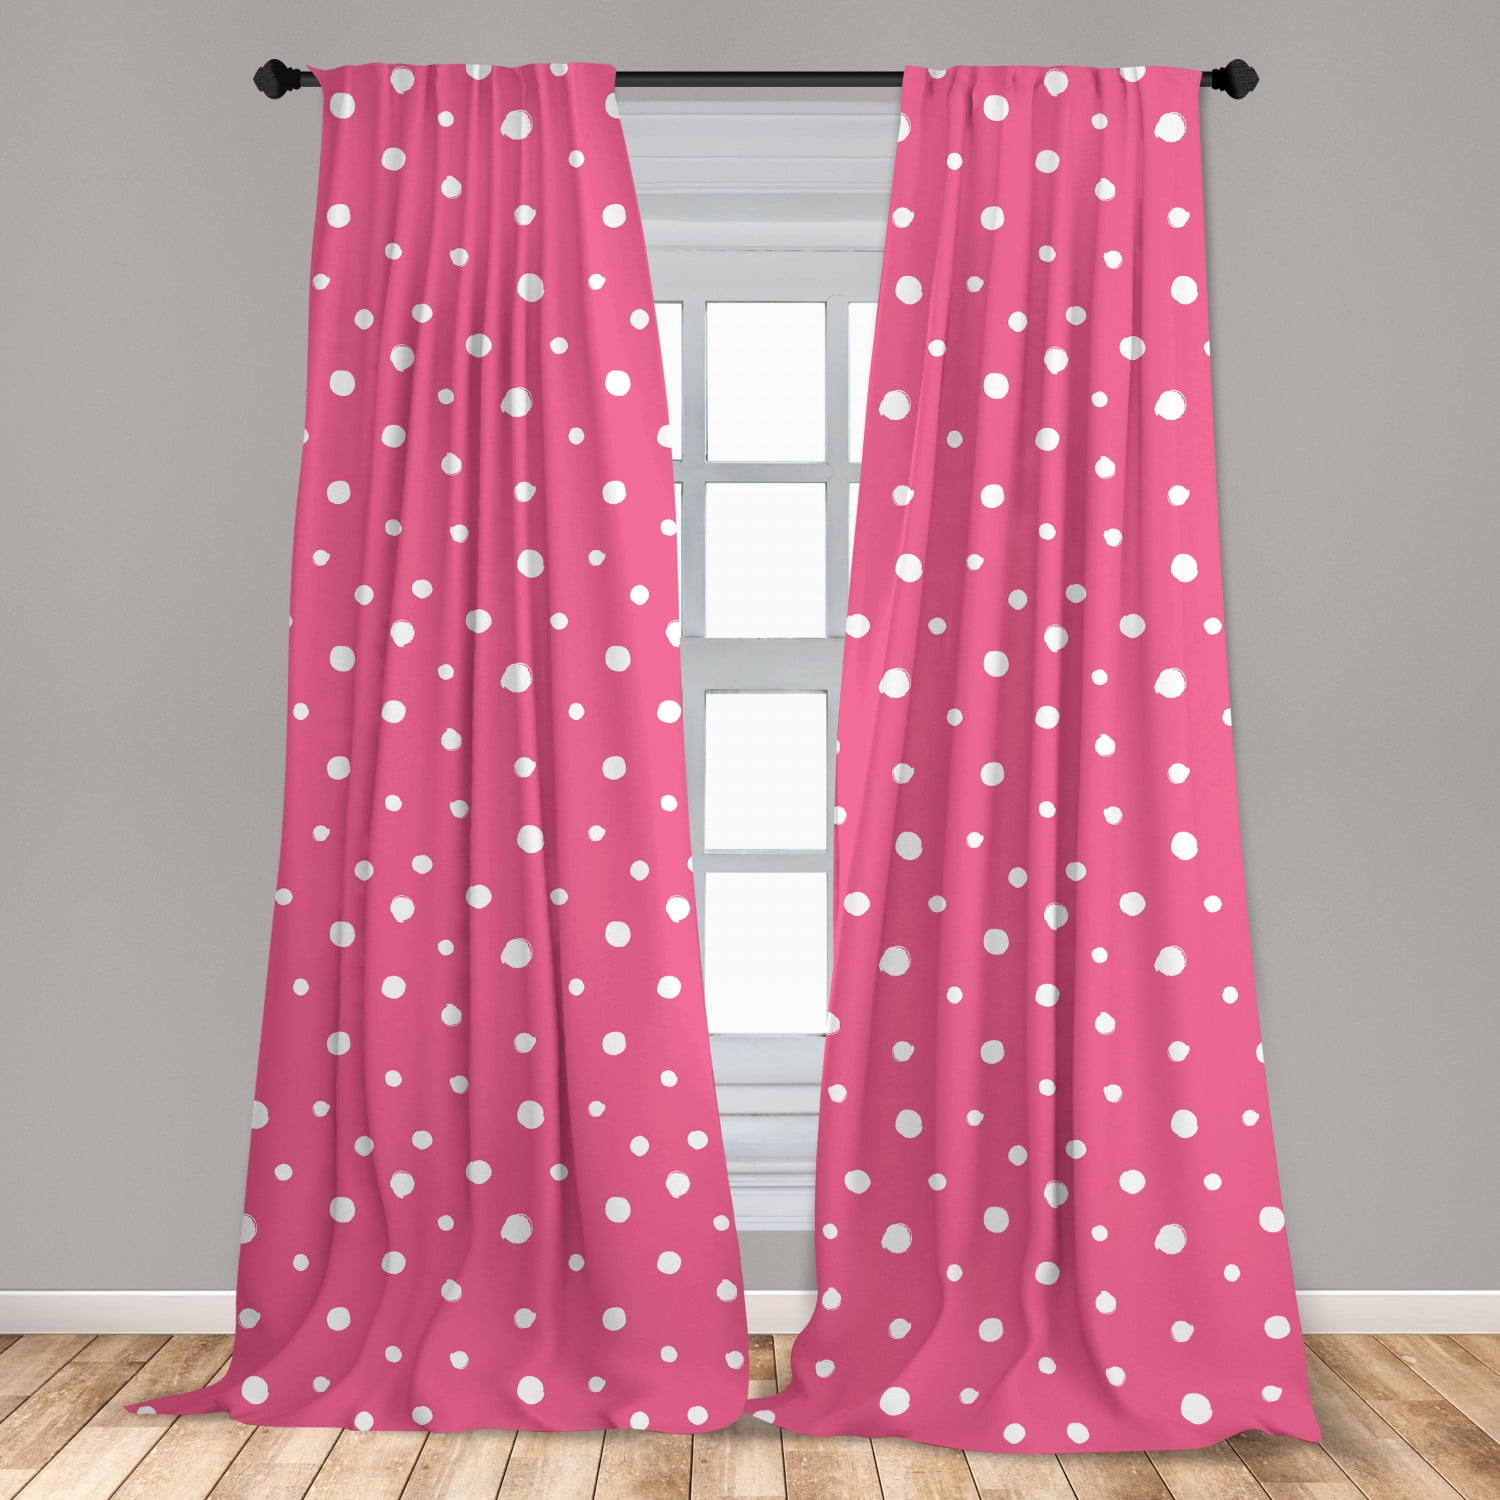 CATS BEDDING OR CURTAINS CUTE KITTENS KITTY POLKA DOT HEARTS BUTTERFLY PINK BLUE 